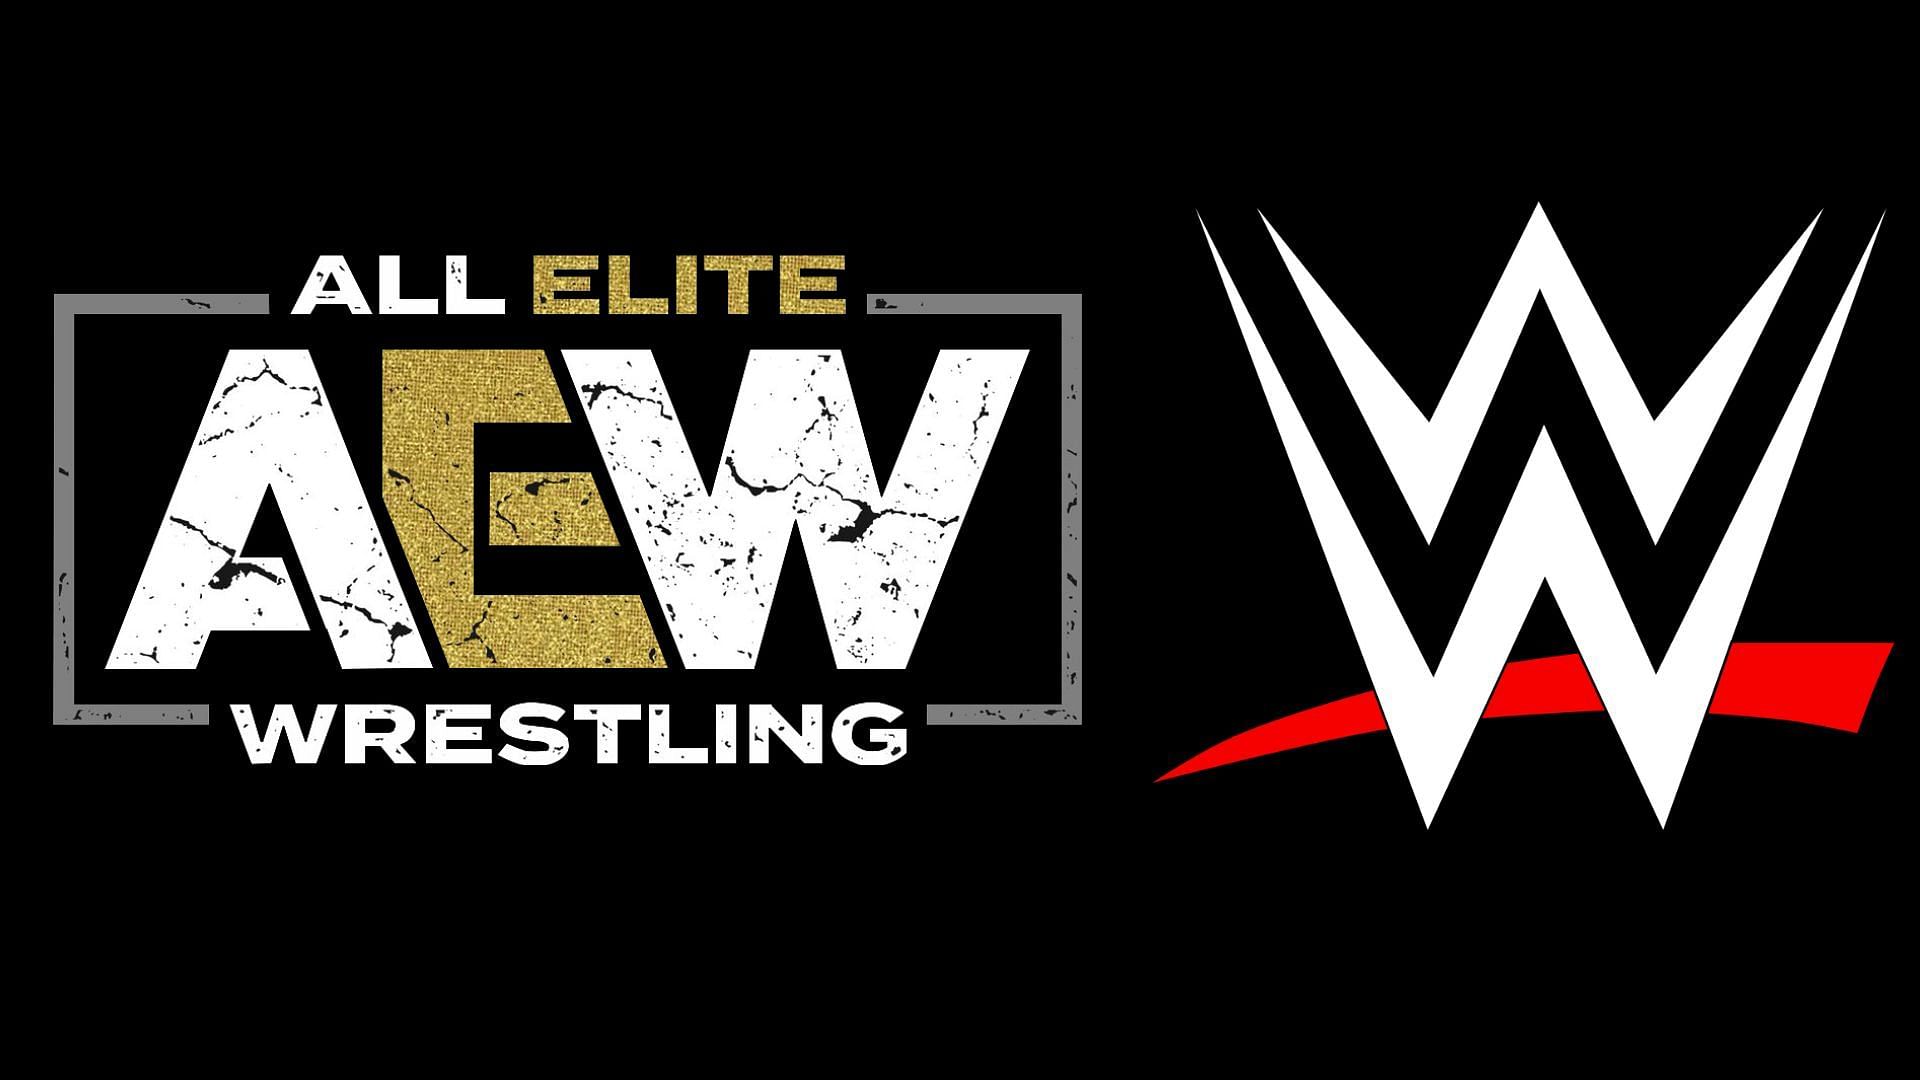 Could this star shockingly leave AEW and jump to WWE?